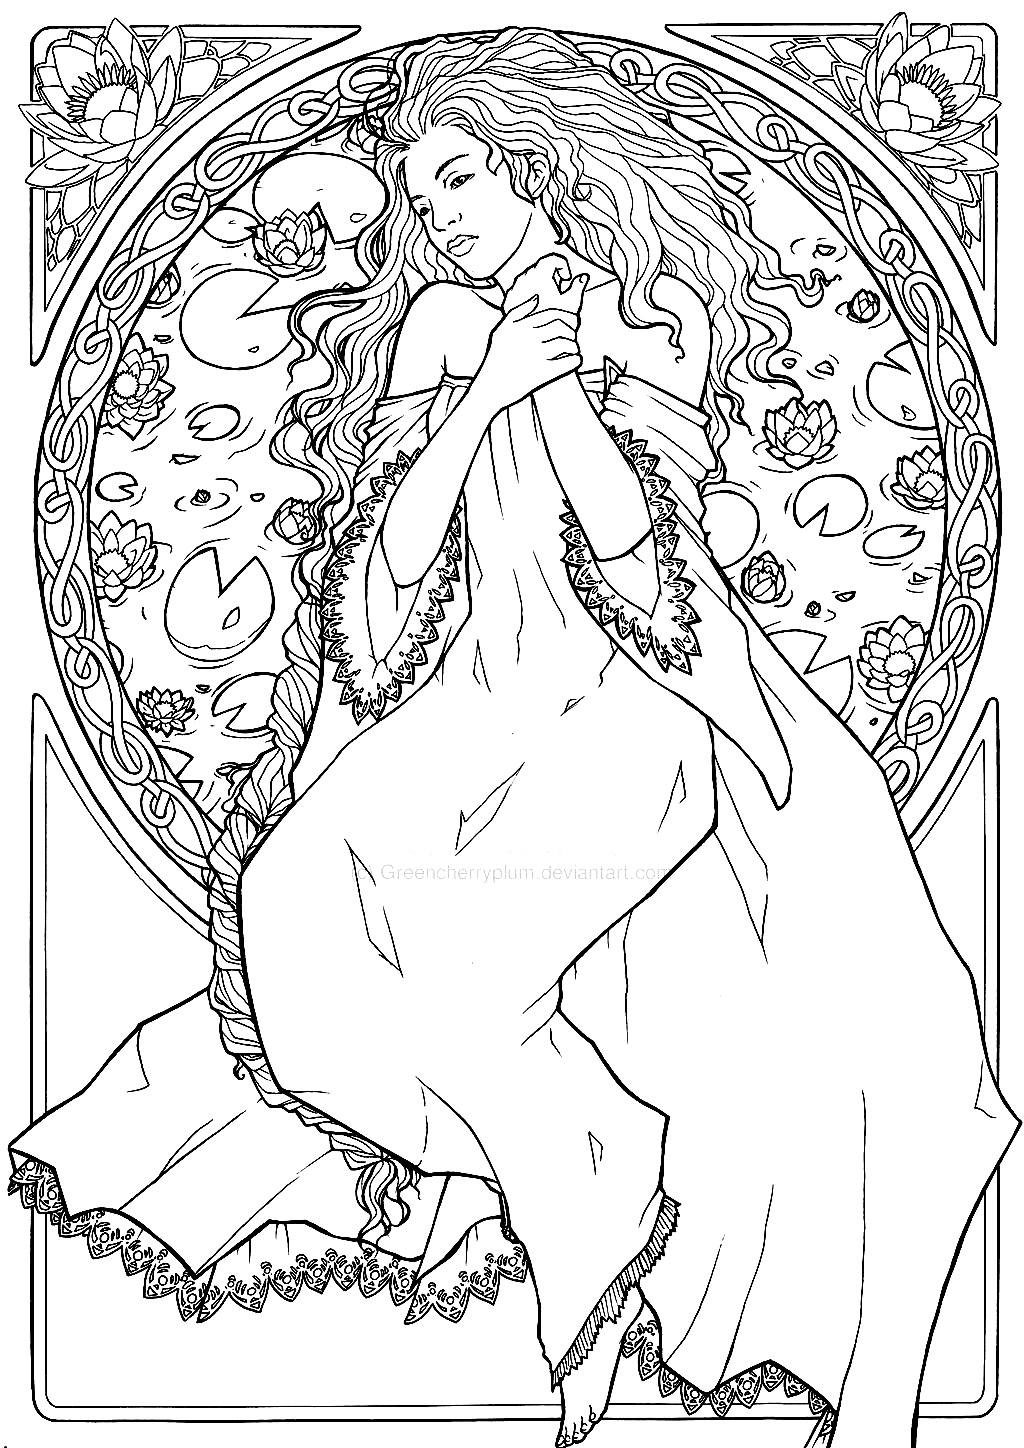 A modern design freely inspired by Art Nouveau. The illustrator of this coloring page was inspired by the works of Alfons Mucha, a major artist of the Art Nouveau style.